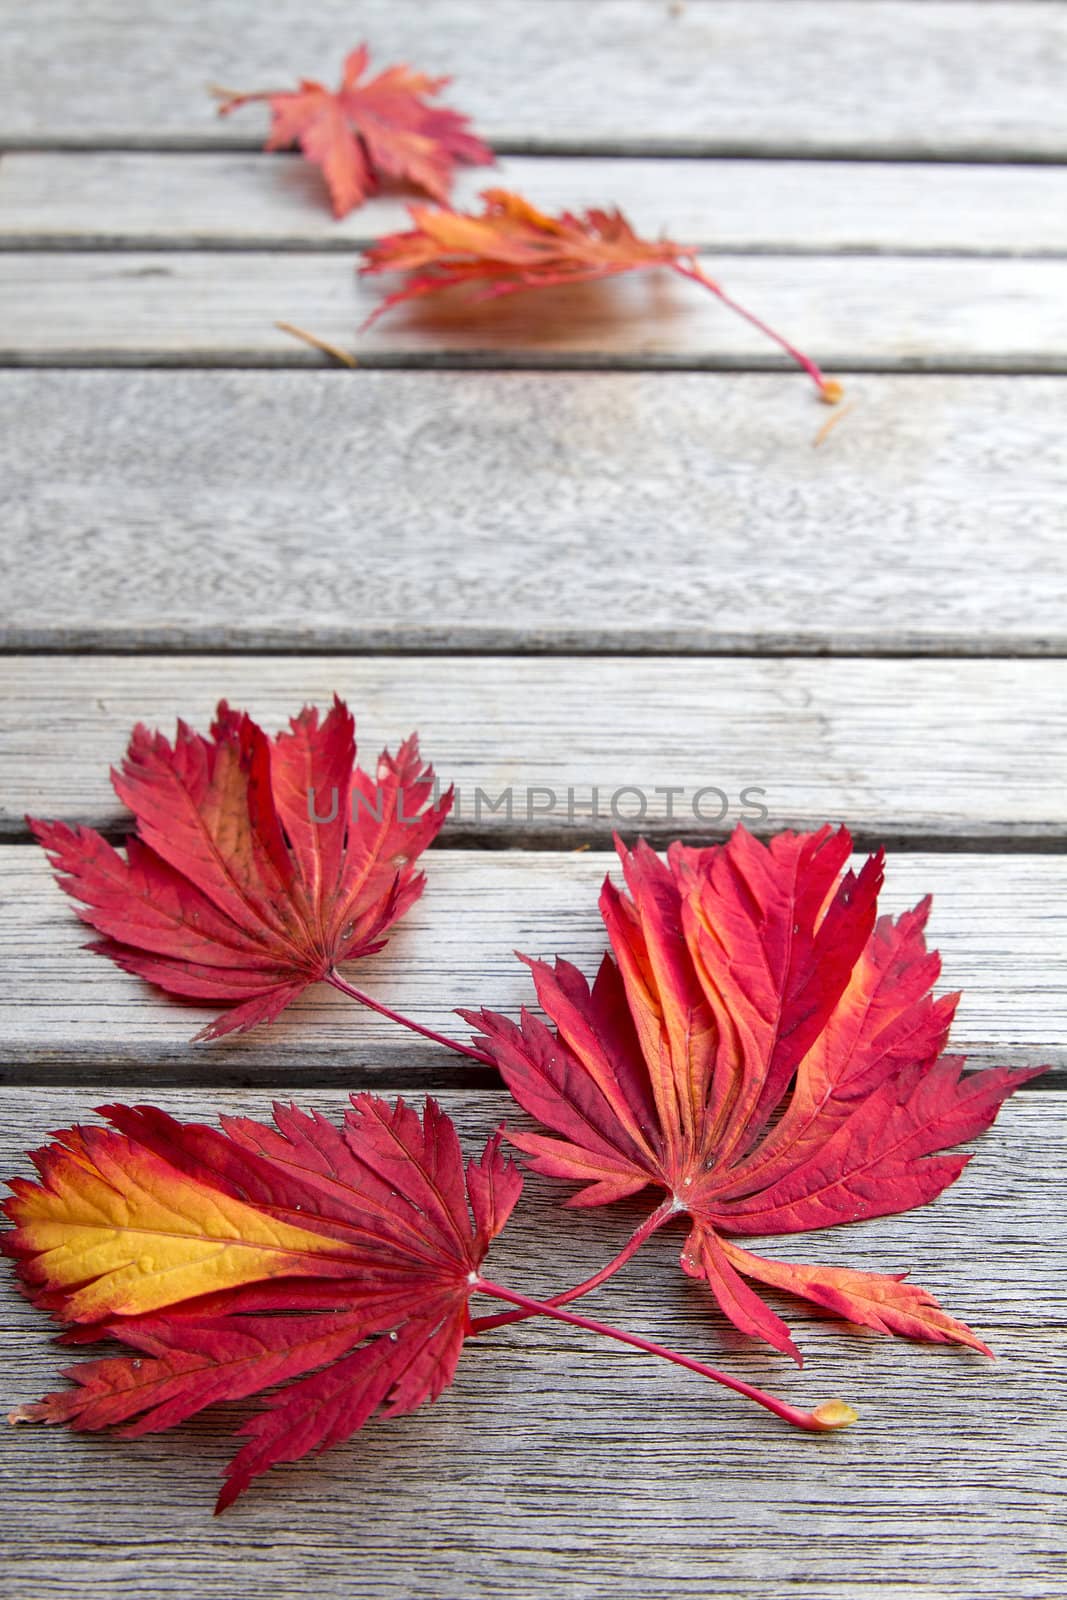 Fall Japanese Maple Leaves on Wooden Bench Background